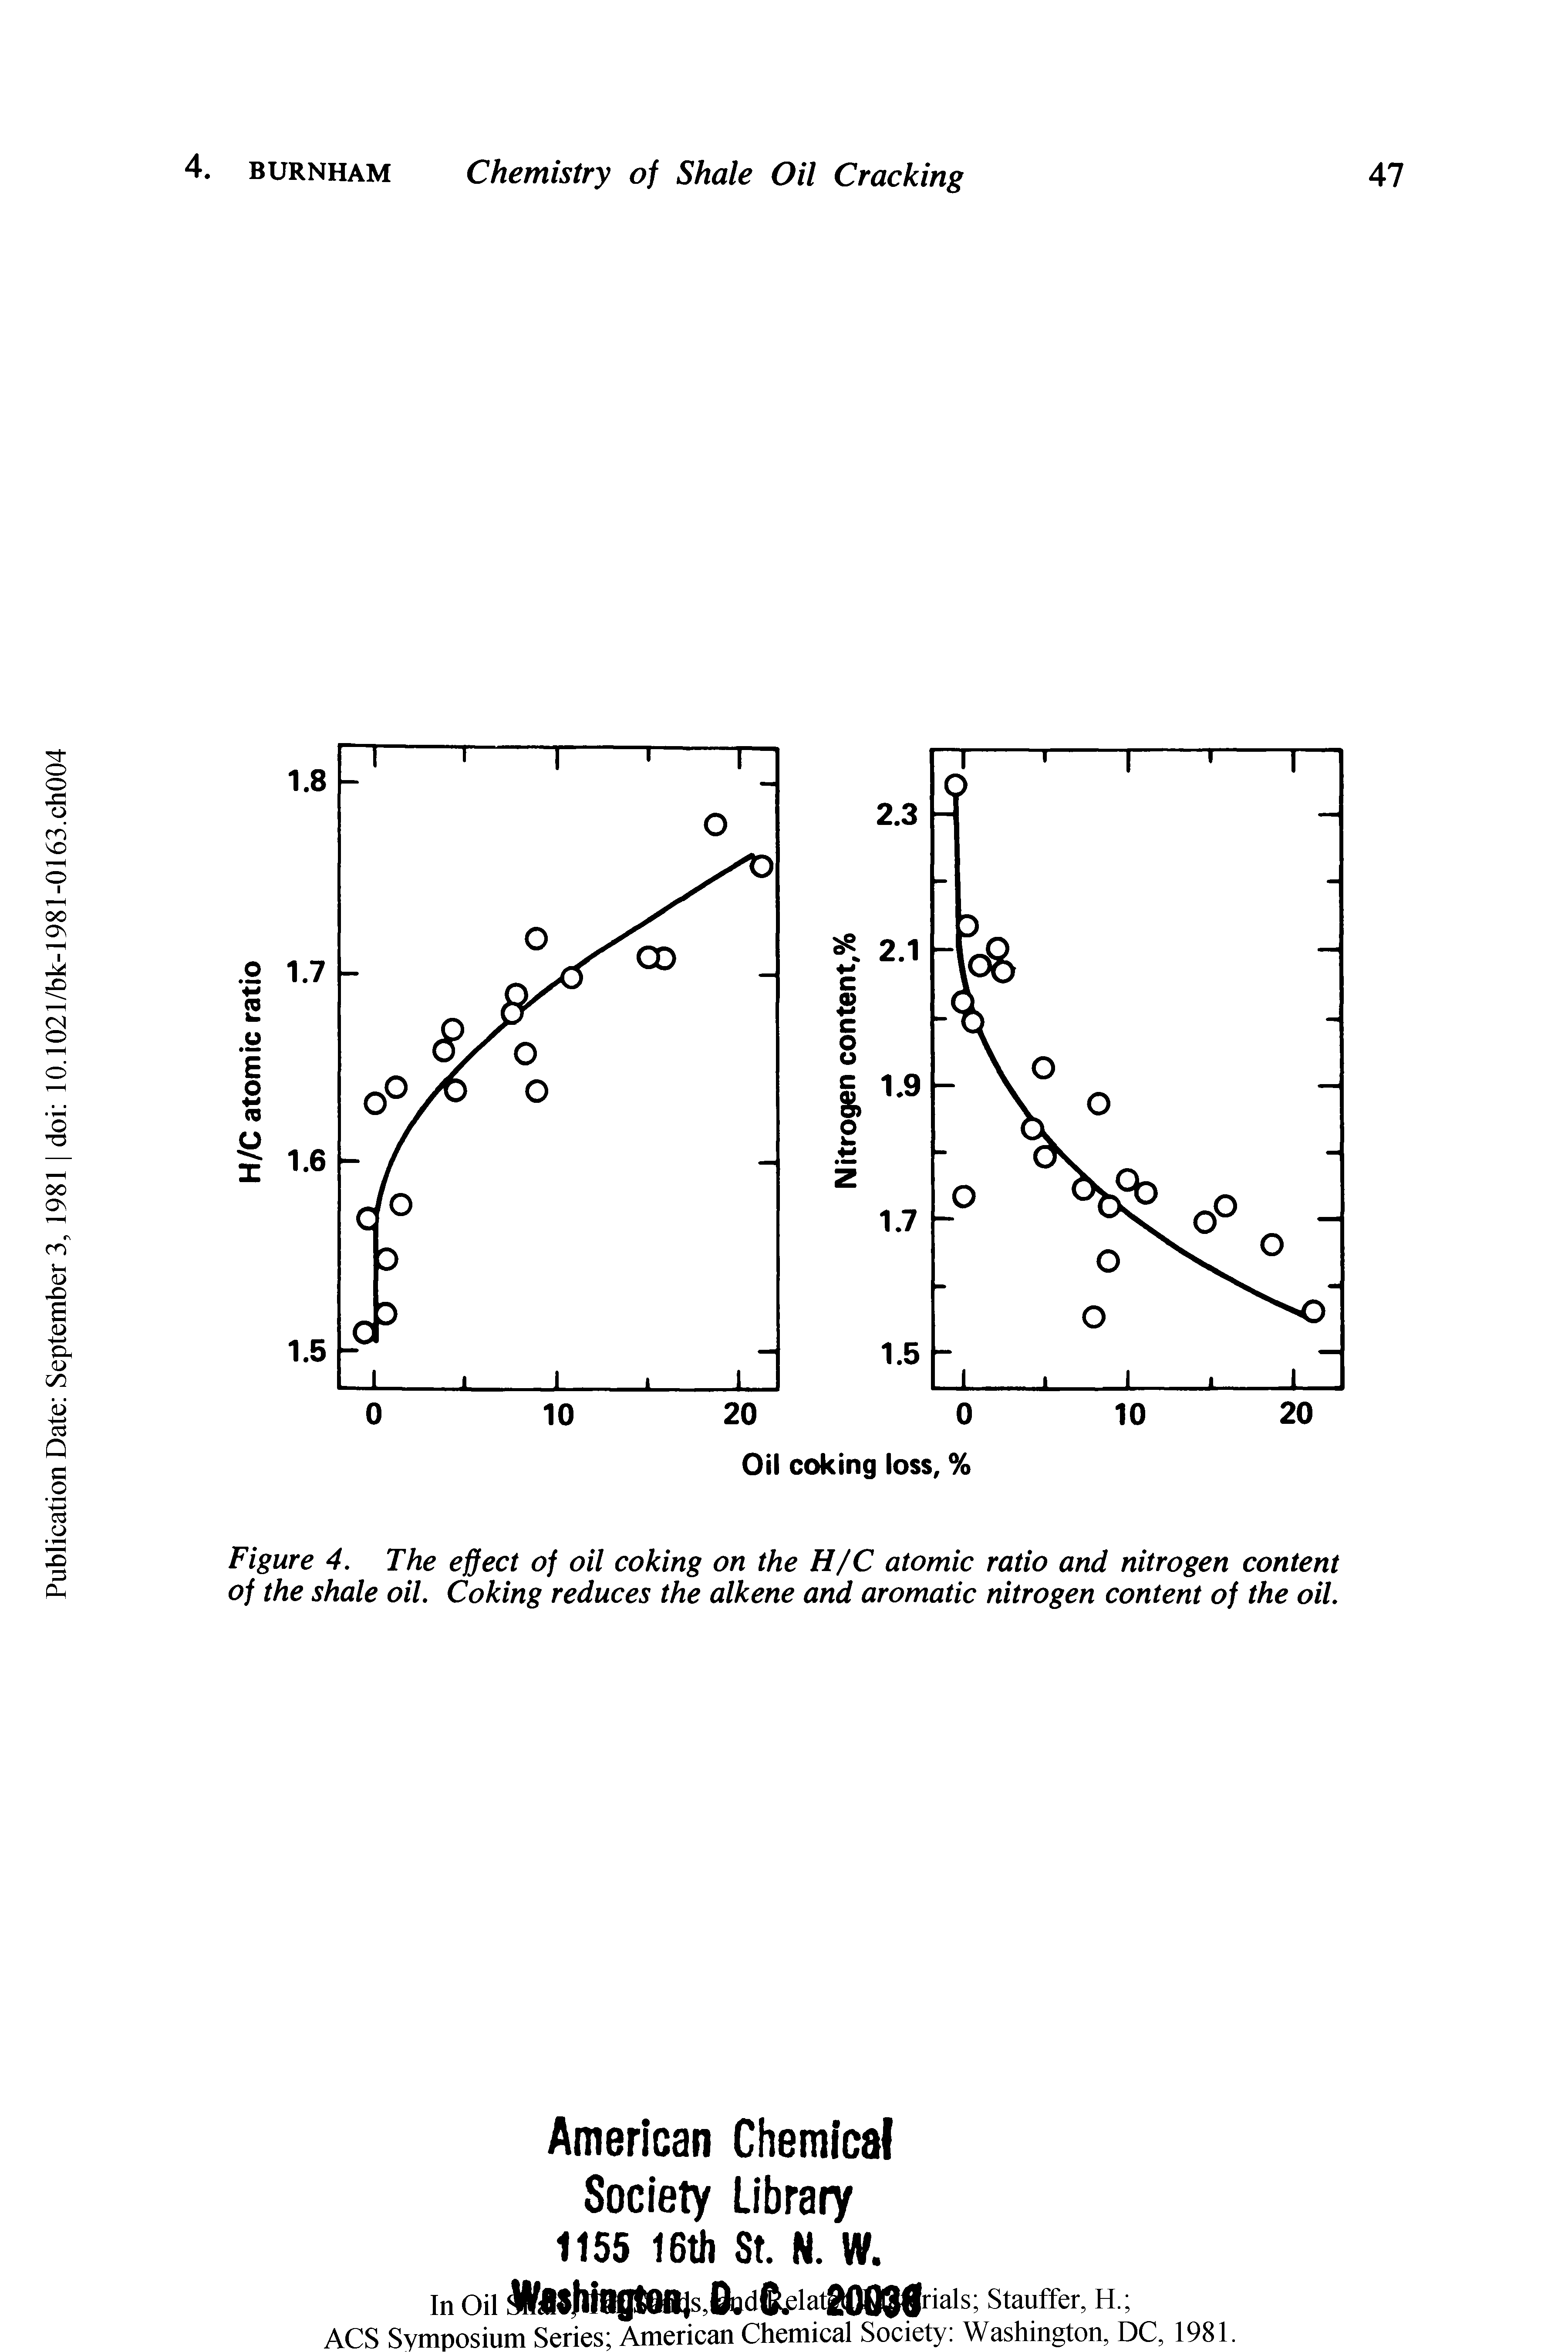 Figure 4. The effect of oil coking on the H/C atomic ratio and nitrogen content of the shale oil. Coking reduces the alkene and aromatic nitrogen content of the oil.